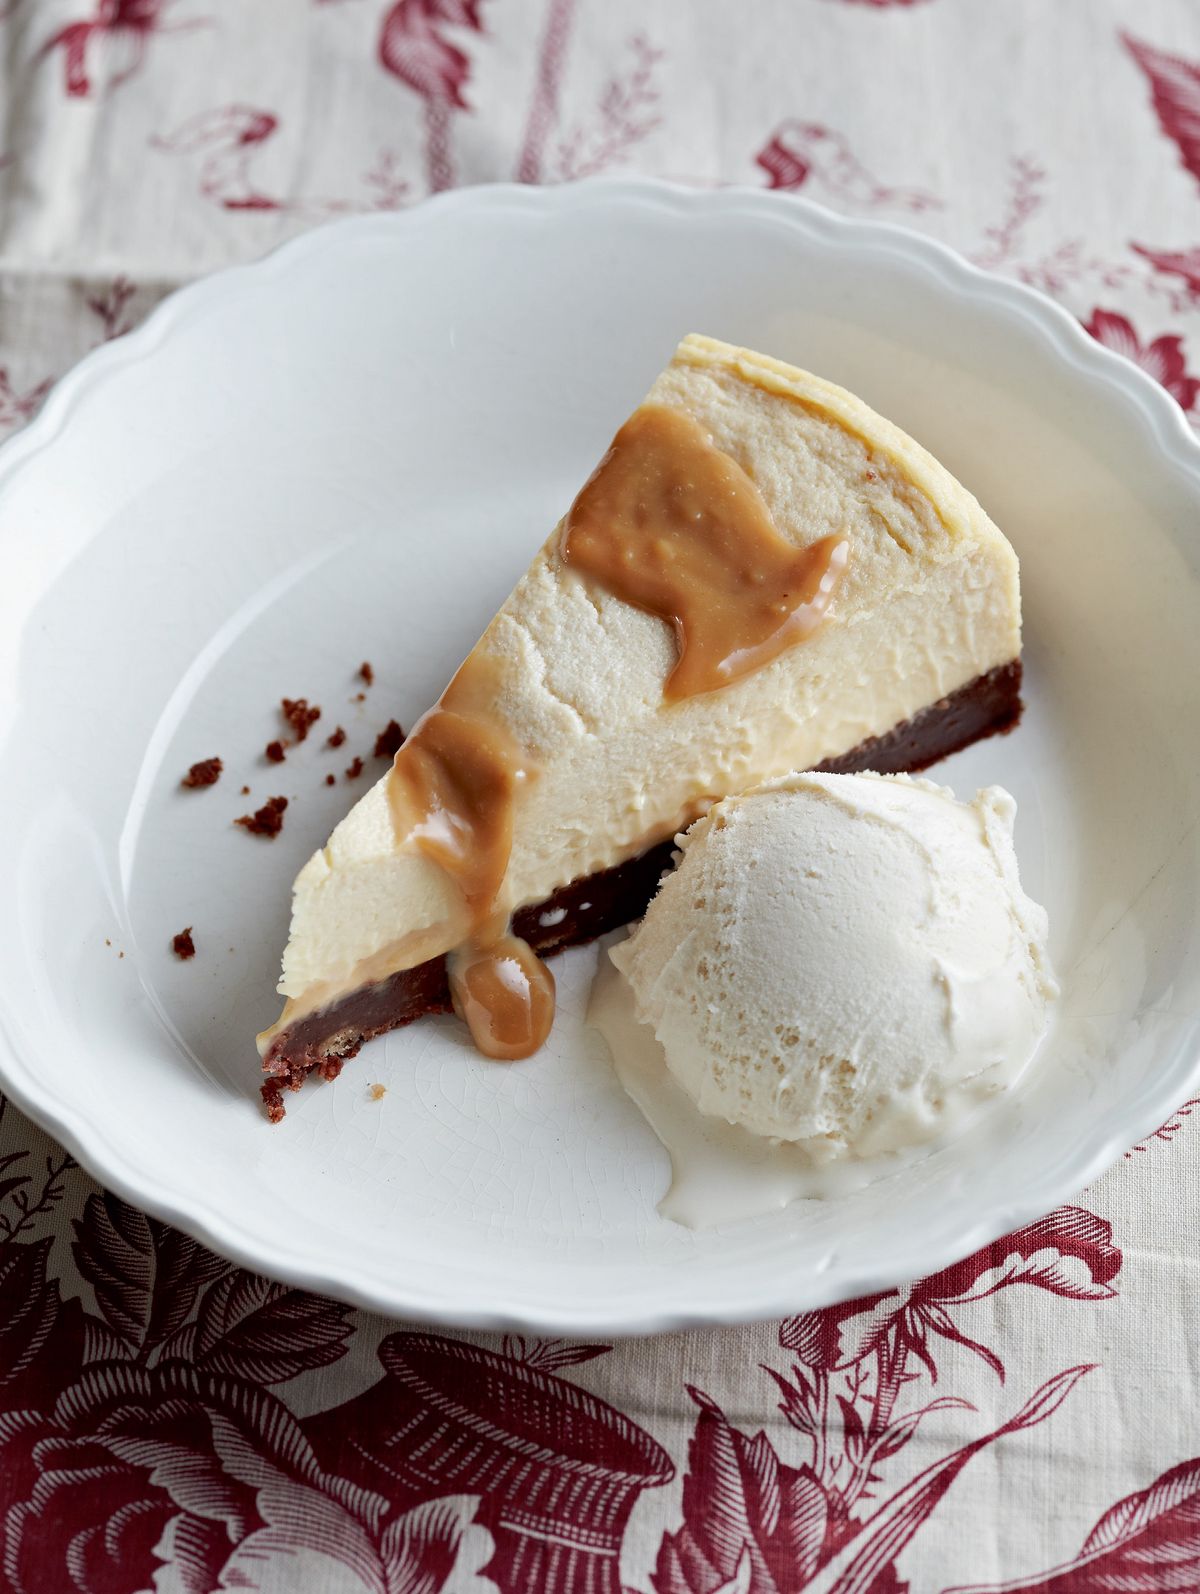 New York-Style Cheesecake with Salted Caramel